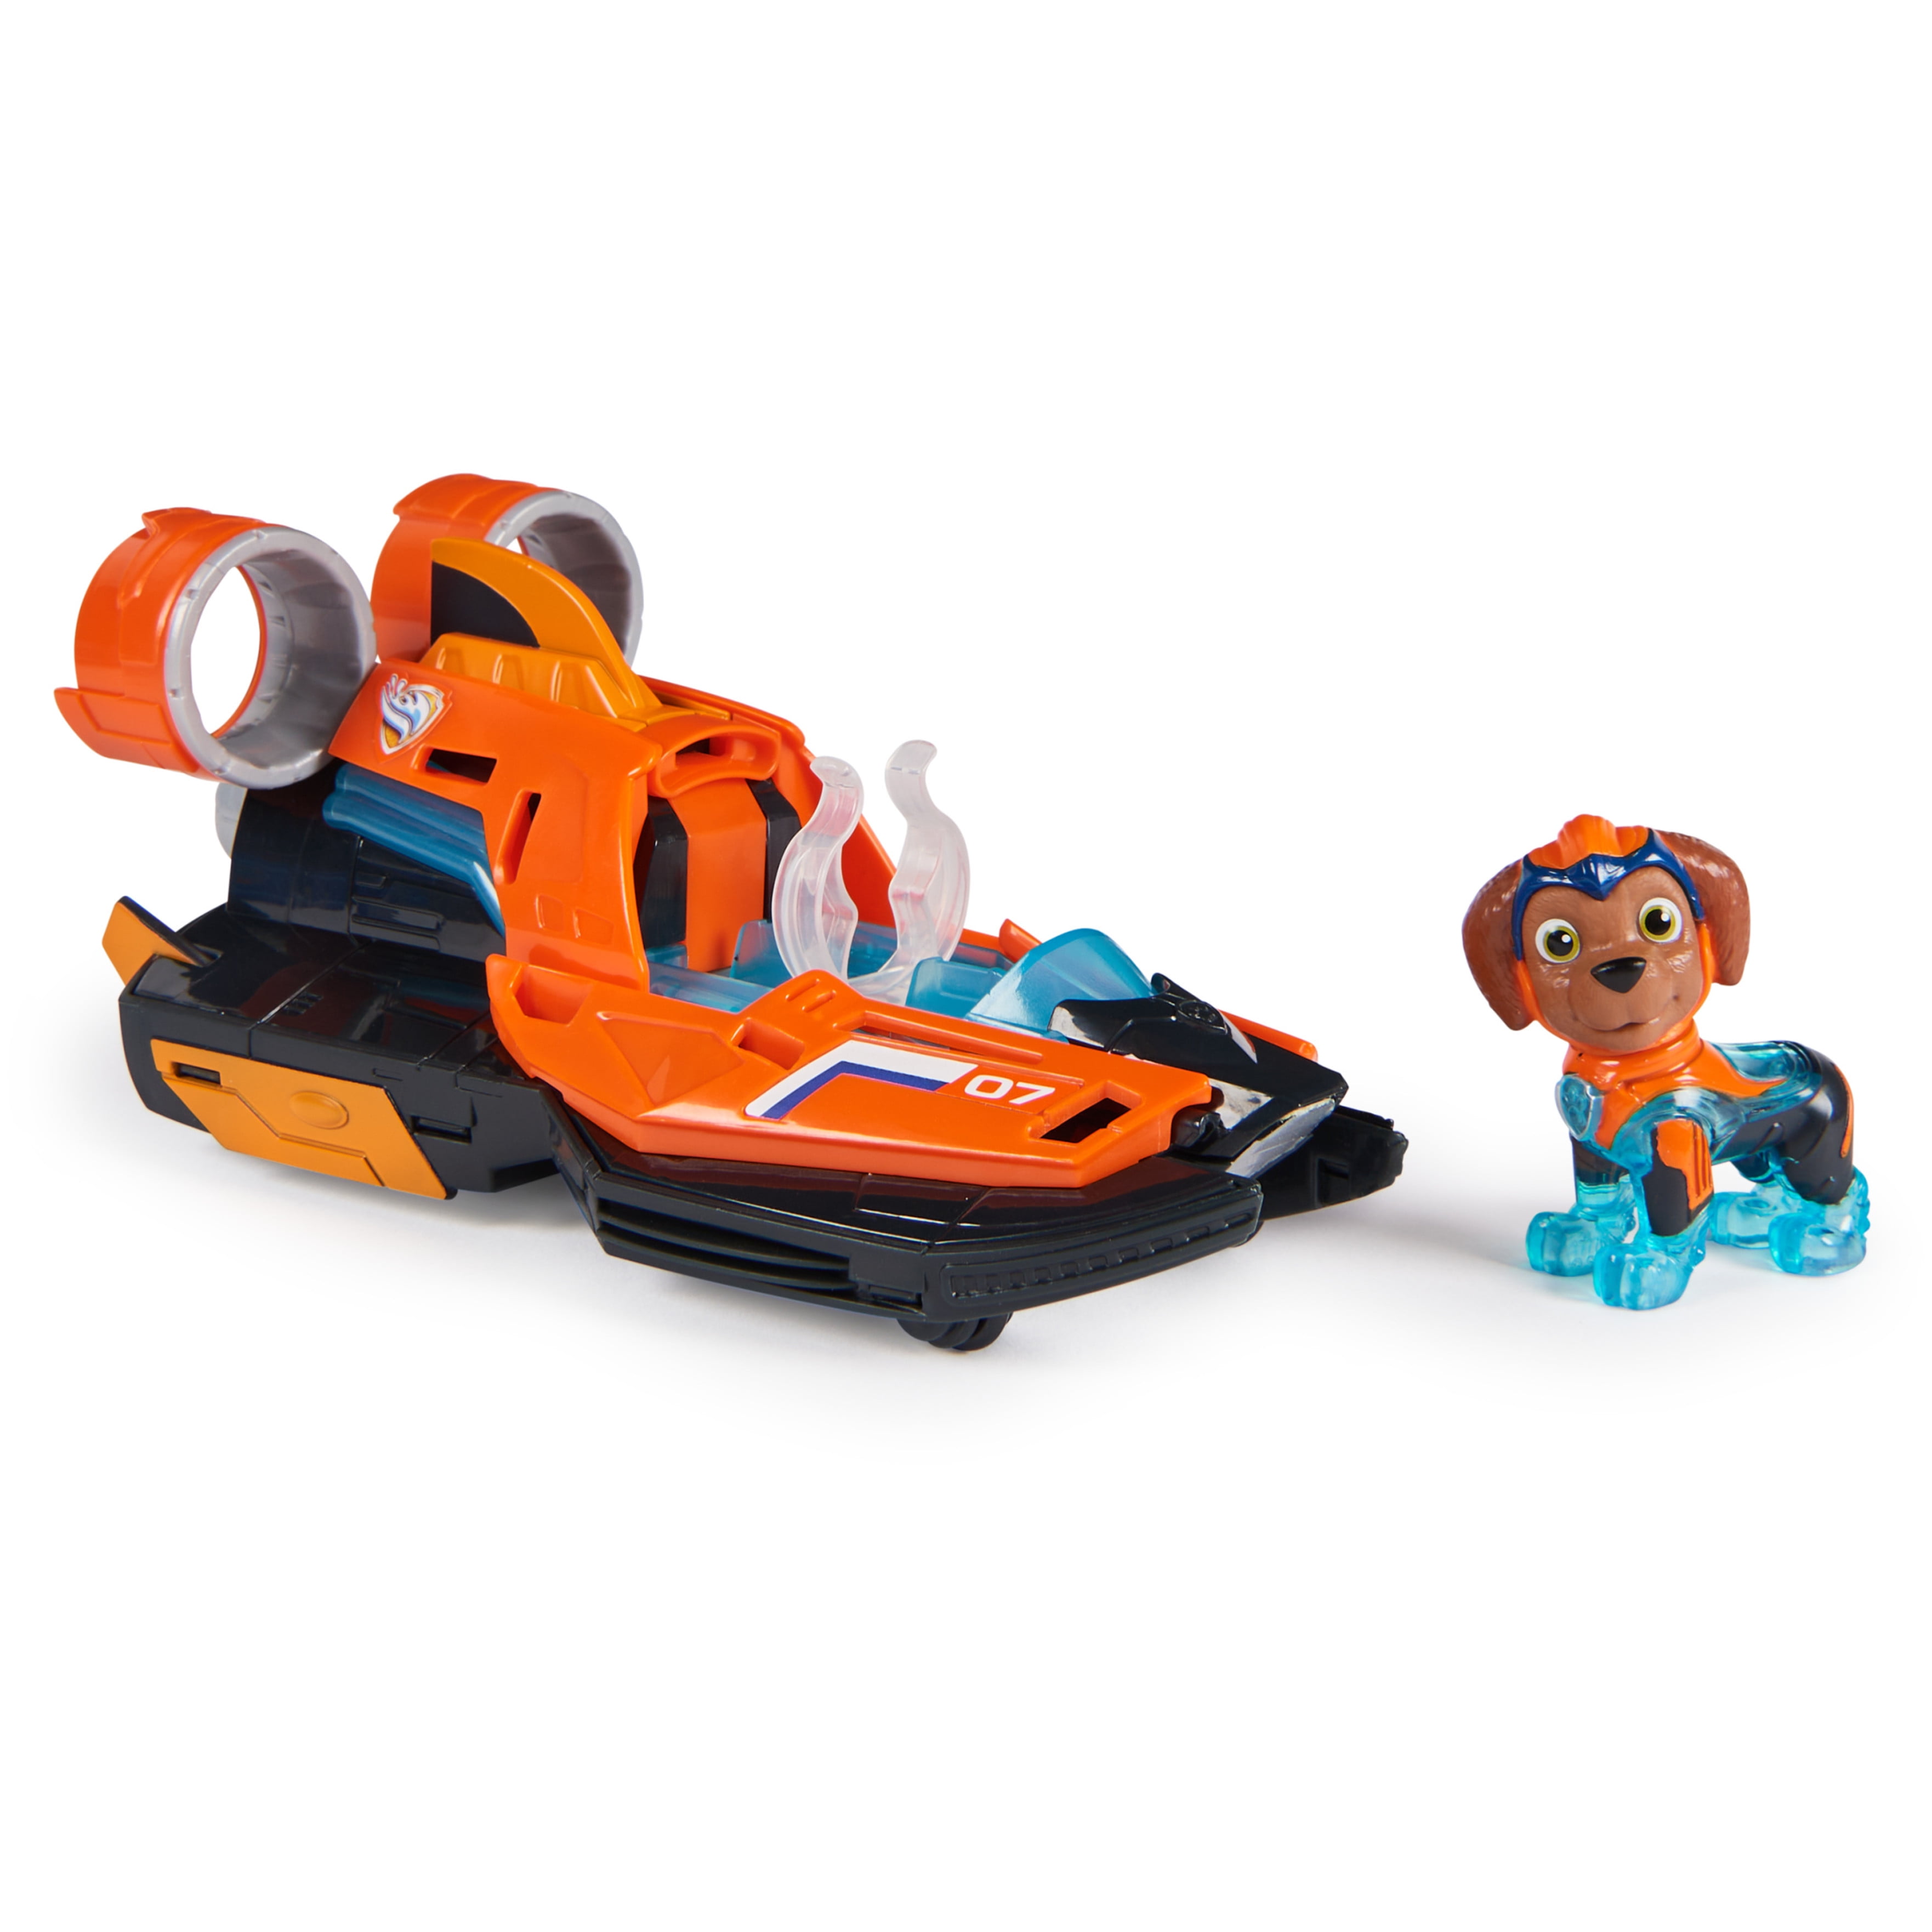 PAW Patrol: The Mighty Movie Jet Boat with Lights, Sounds & Zuma Figure, Ages 3+